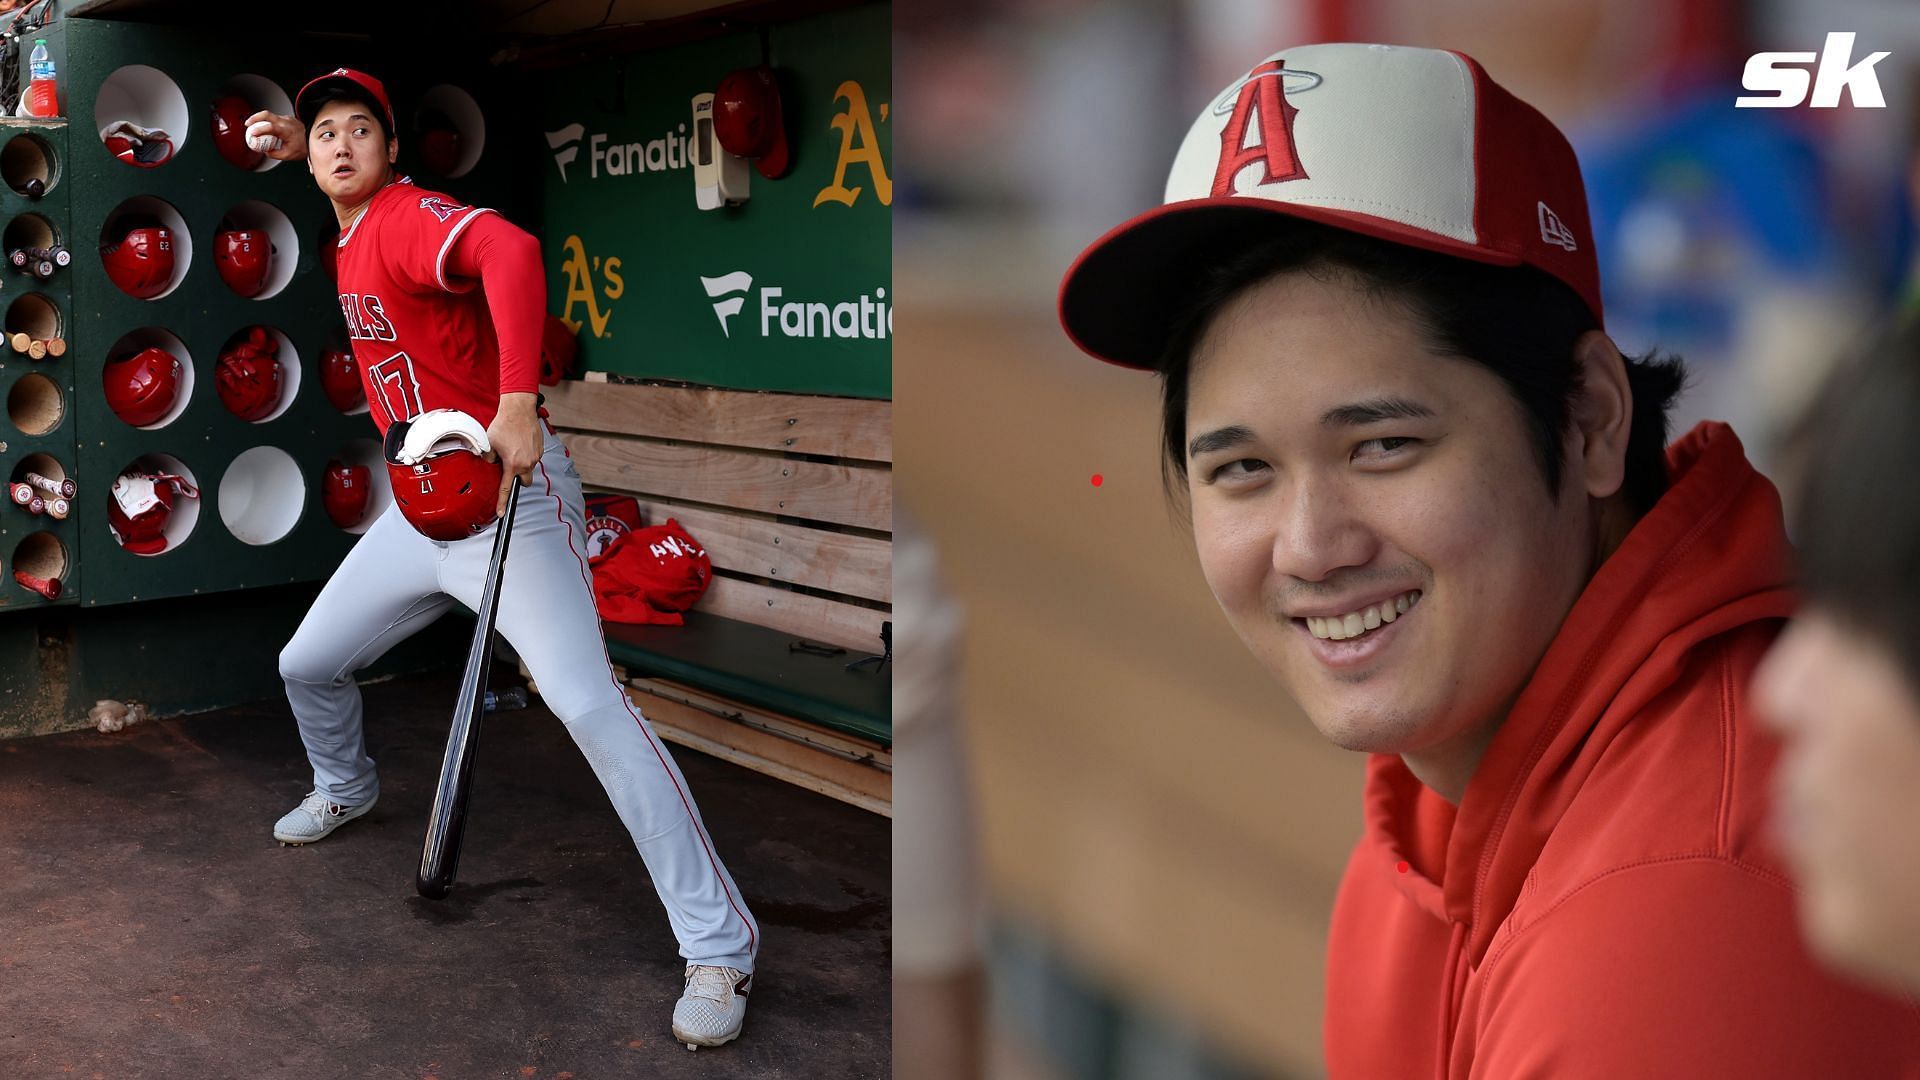 A YouTube channel has implied some rather startling accusations against Shohei Ohtani